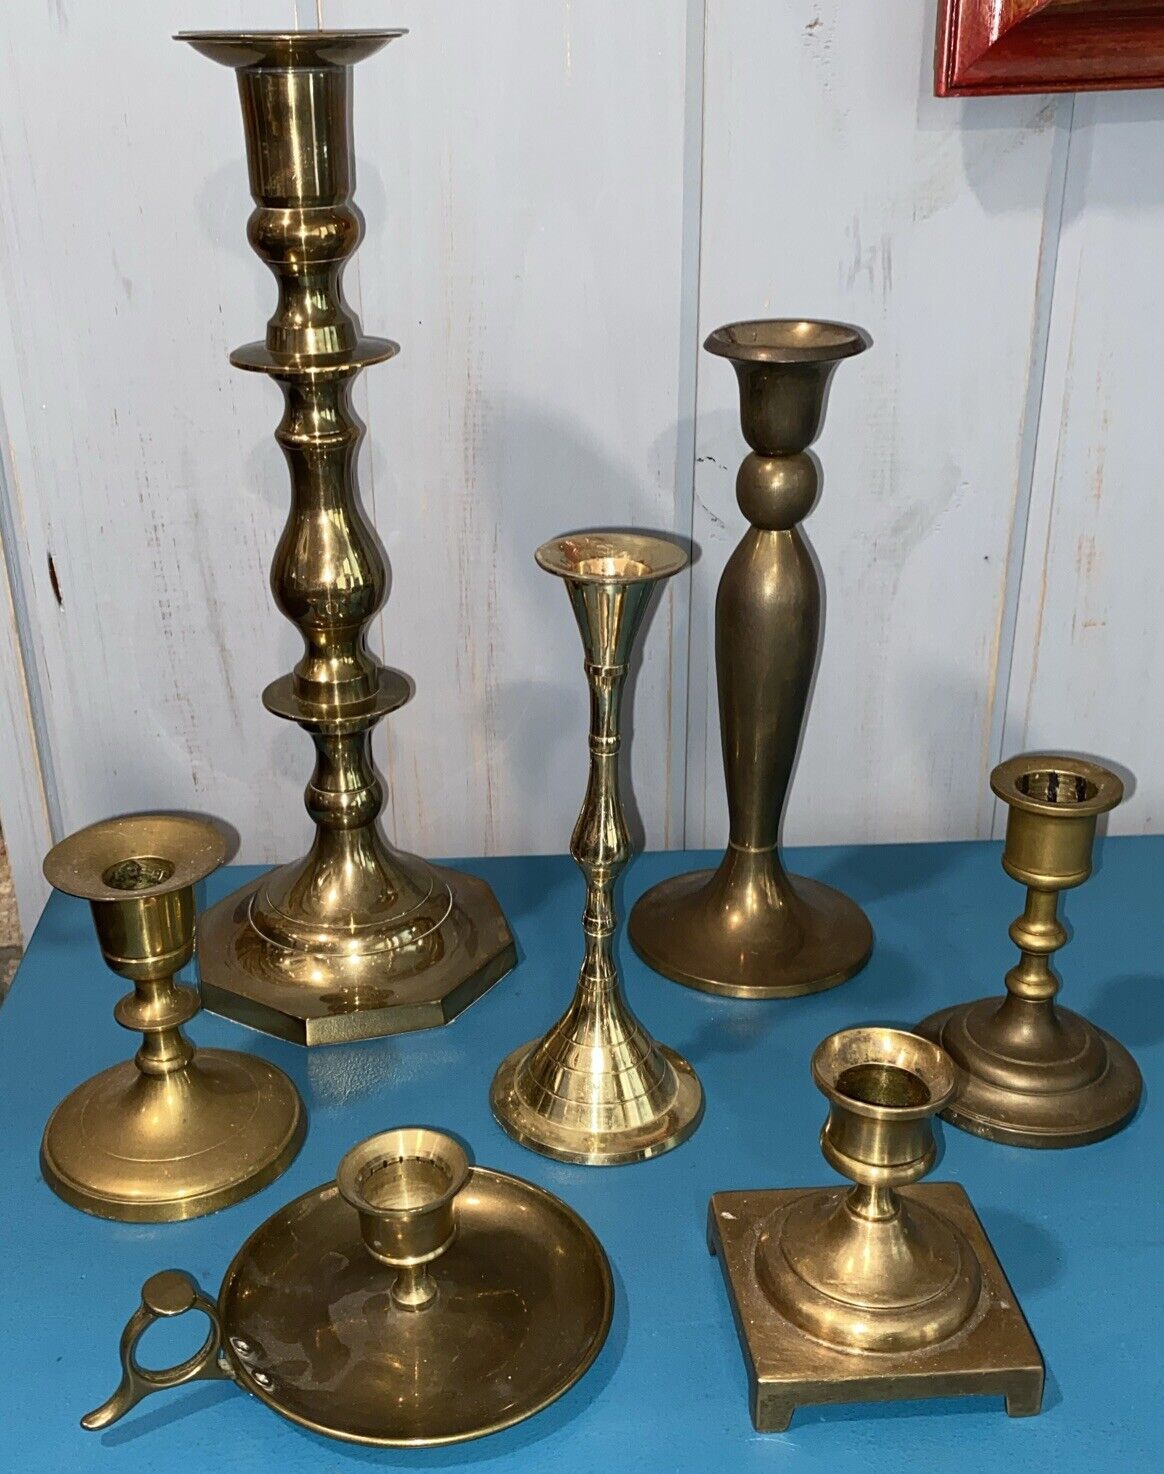 Mixed Lot of 8 Vintage Brass Candlesticks Holders Weddings Events Cottagecore